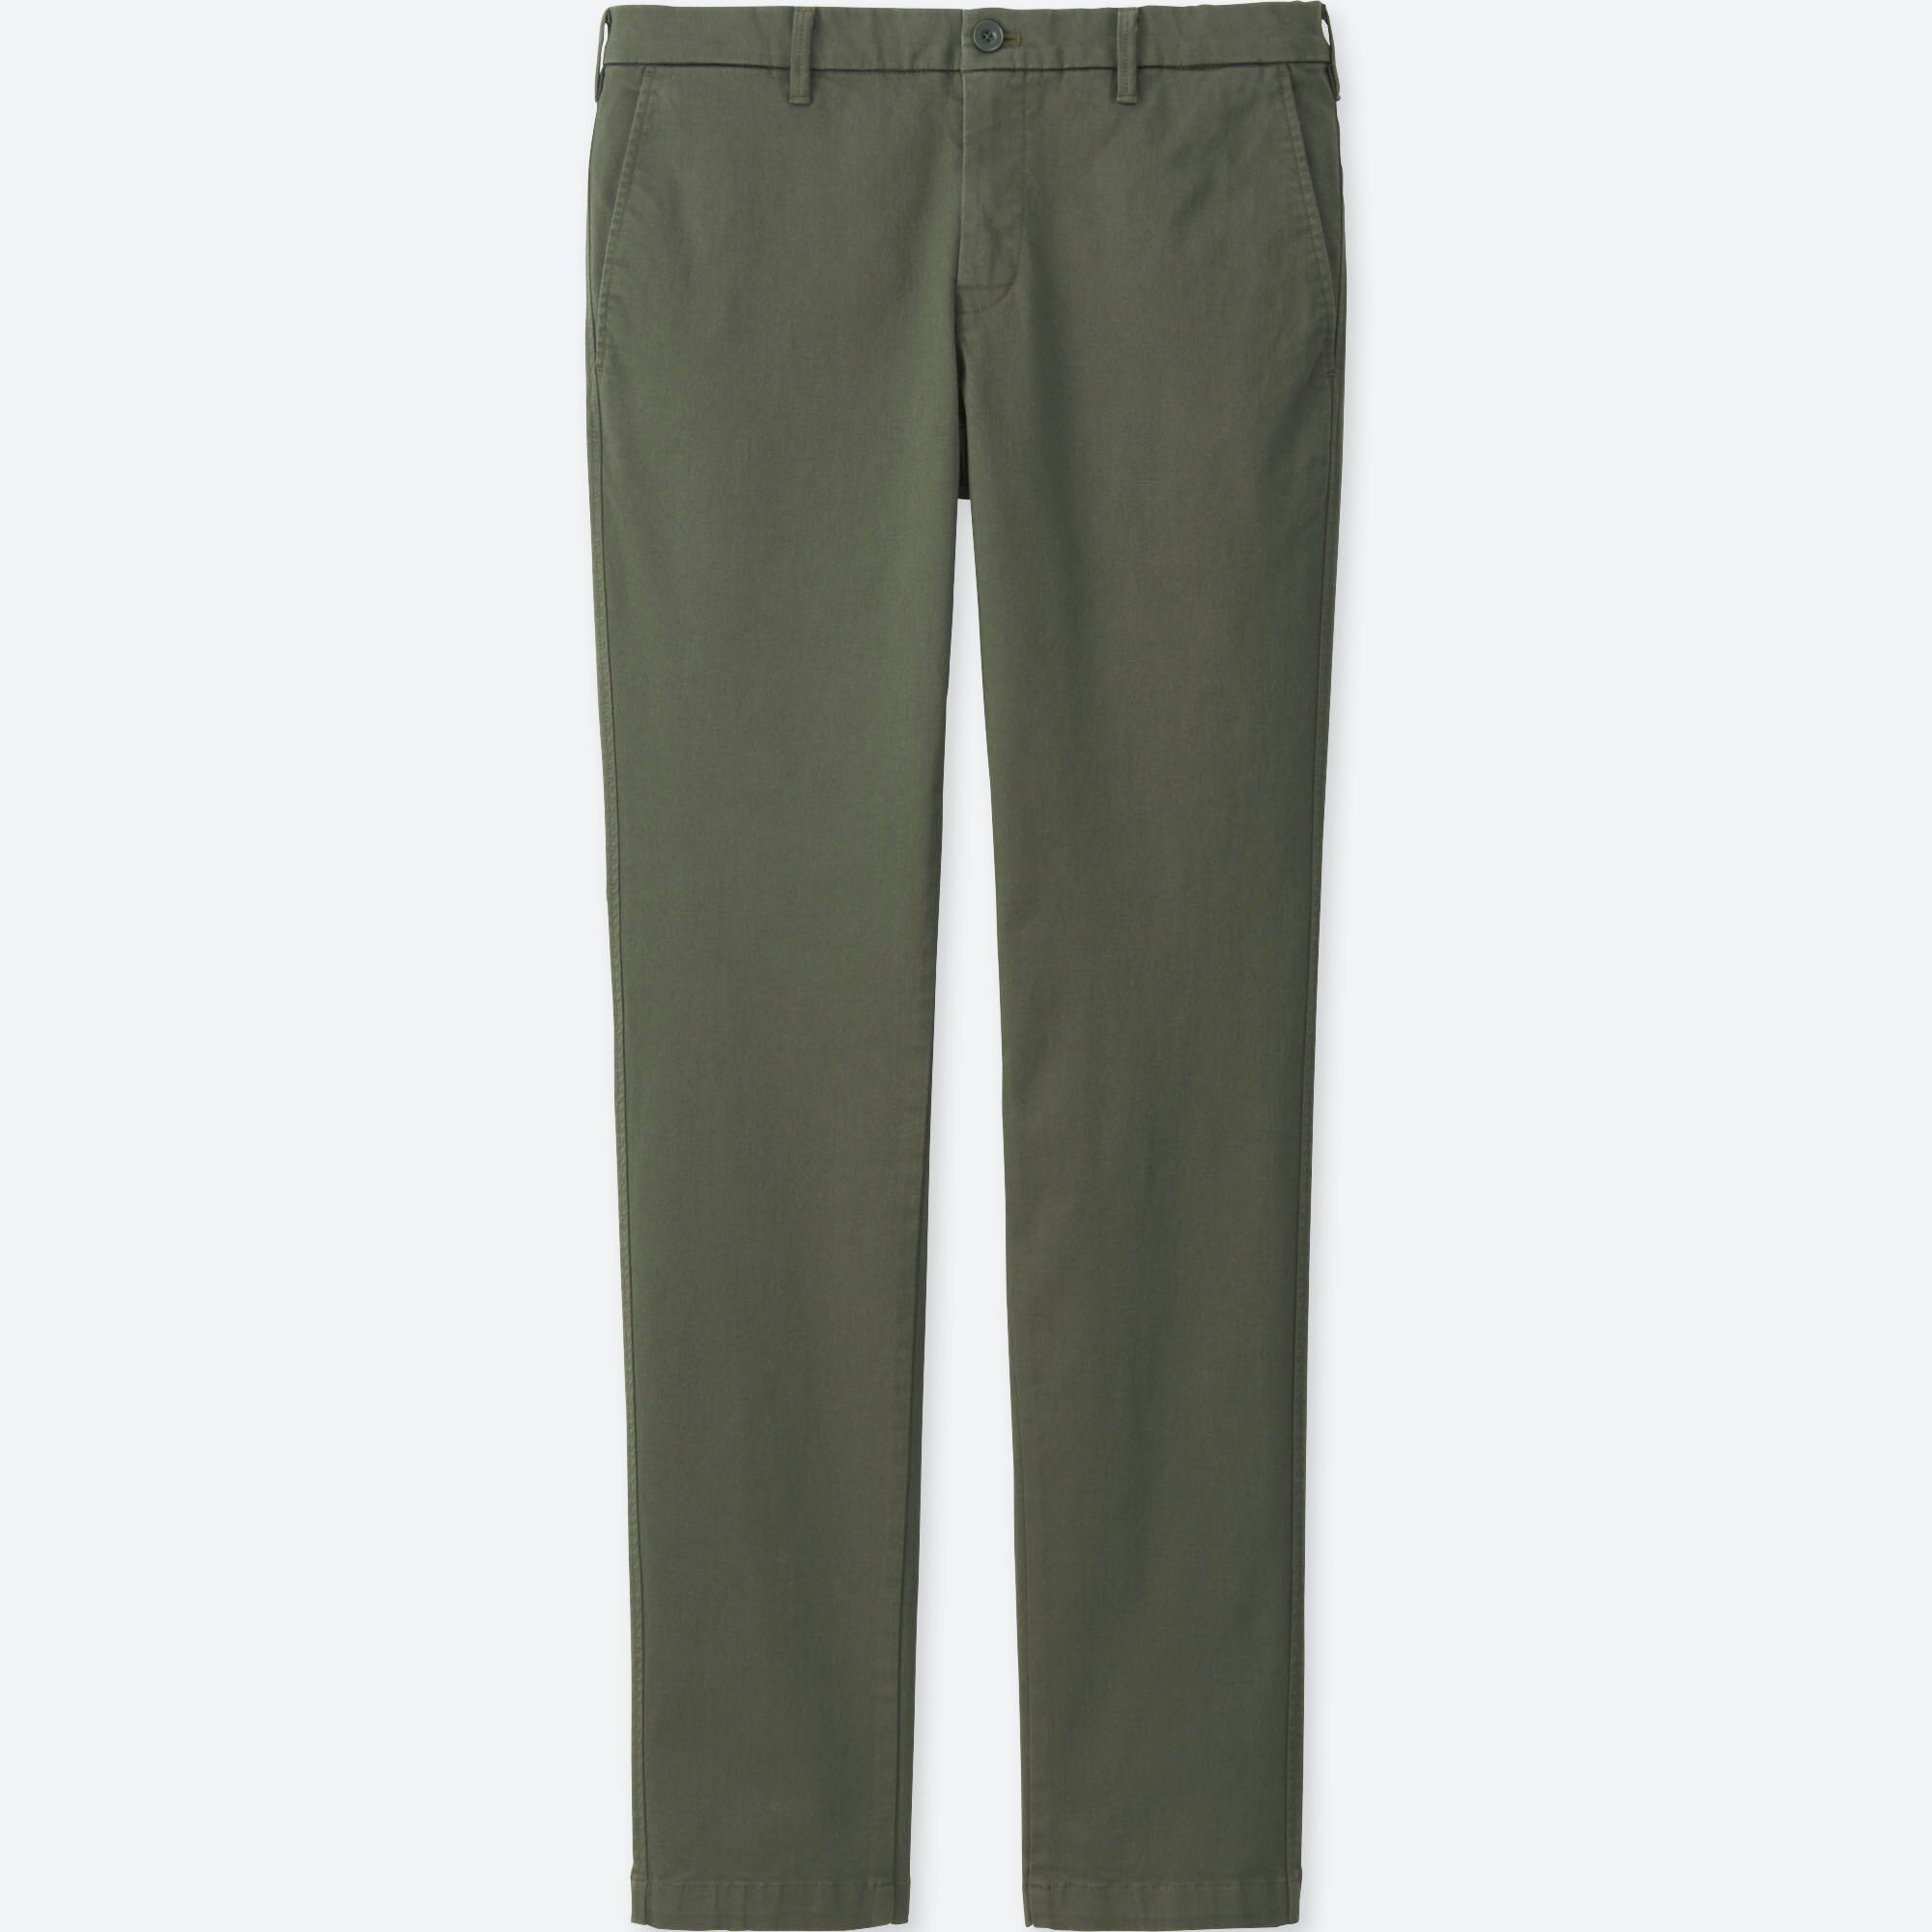 MEN ULTRA STRETCH SKINNY FIT CHINO FLAT FRONT PANTS | UNIQLO US